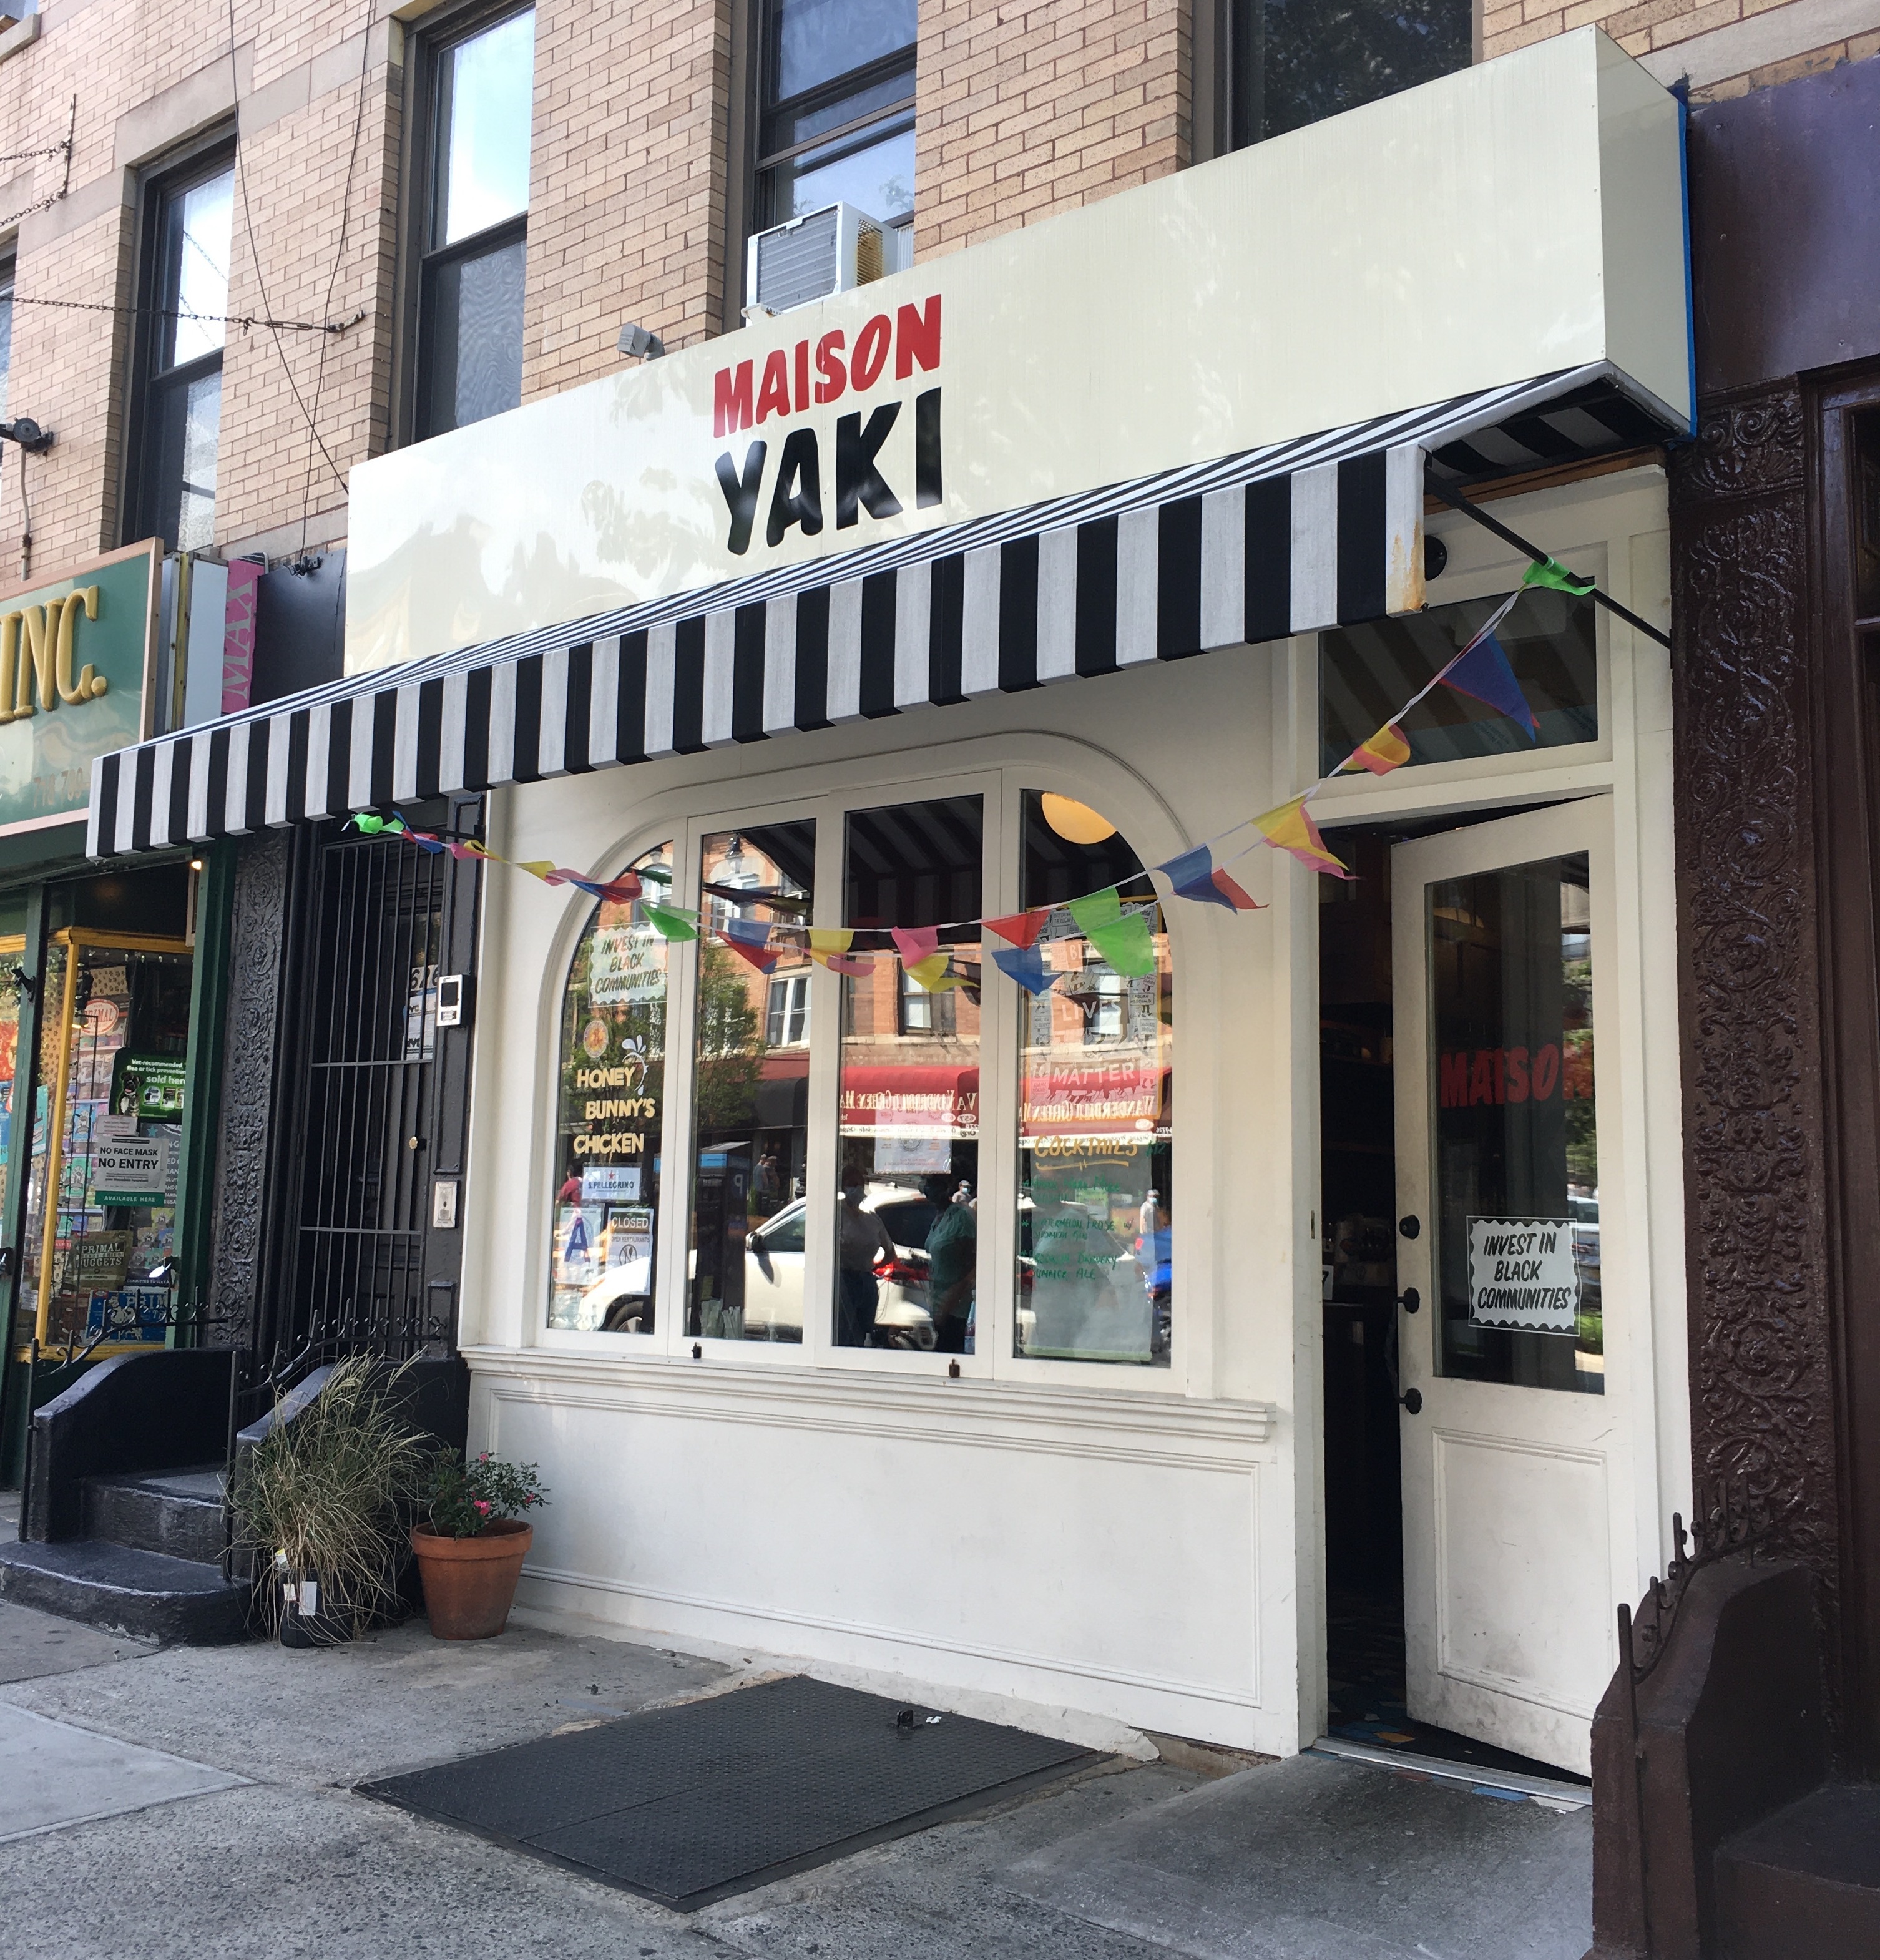 The front of a restaurant with a striped awning, colorful flags, and a sign that reads “Maison Yaki”